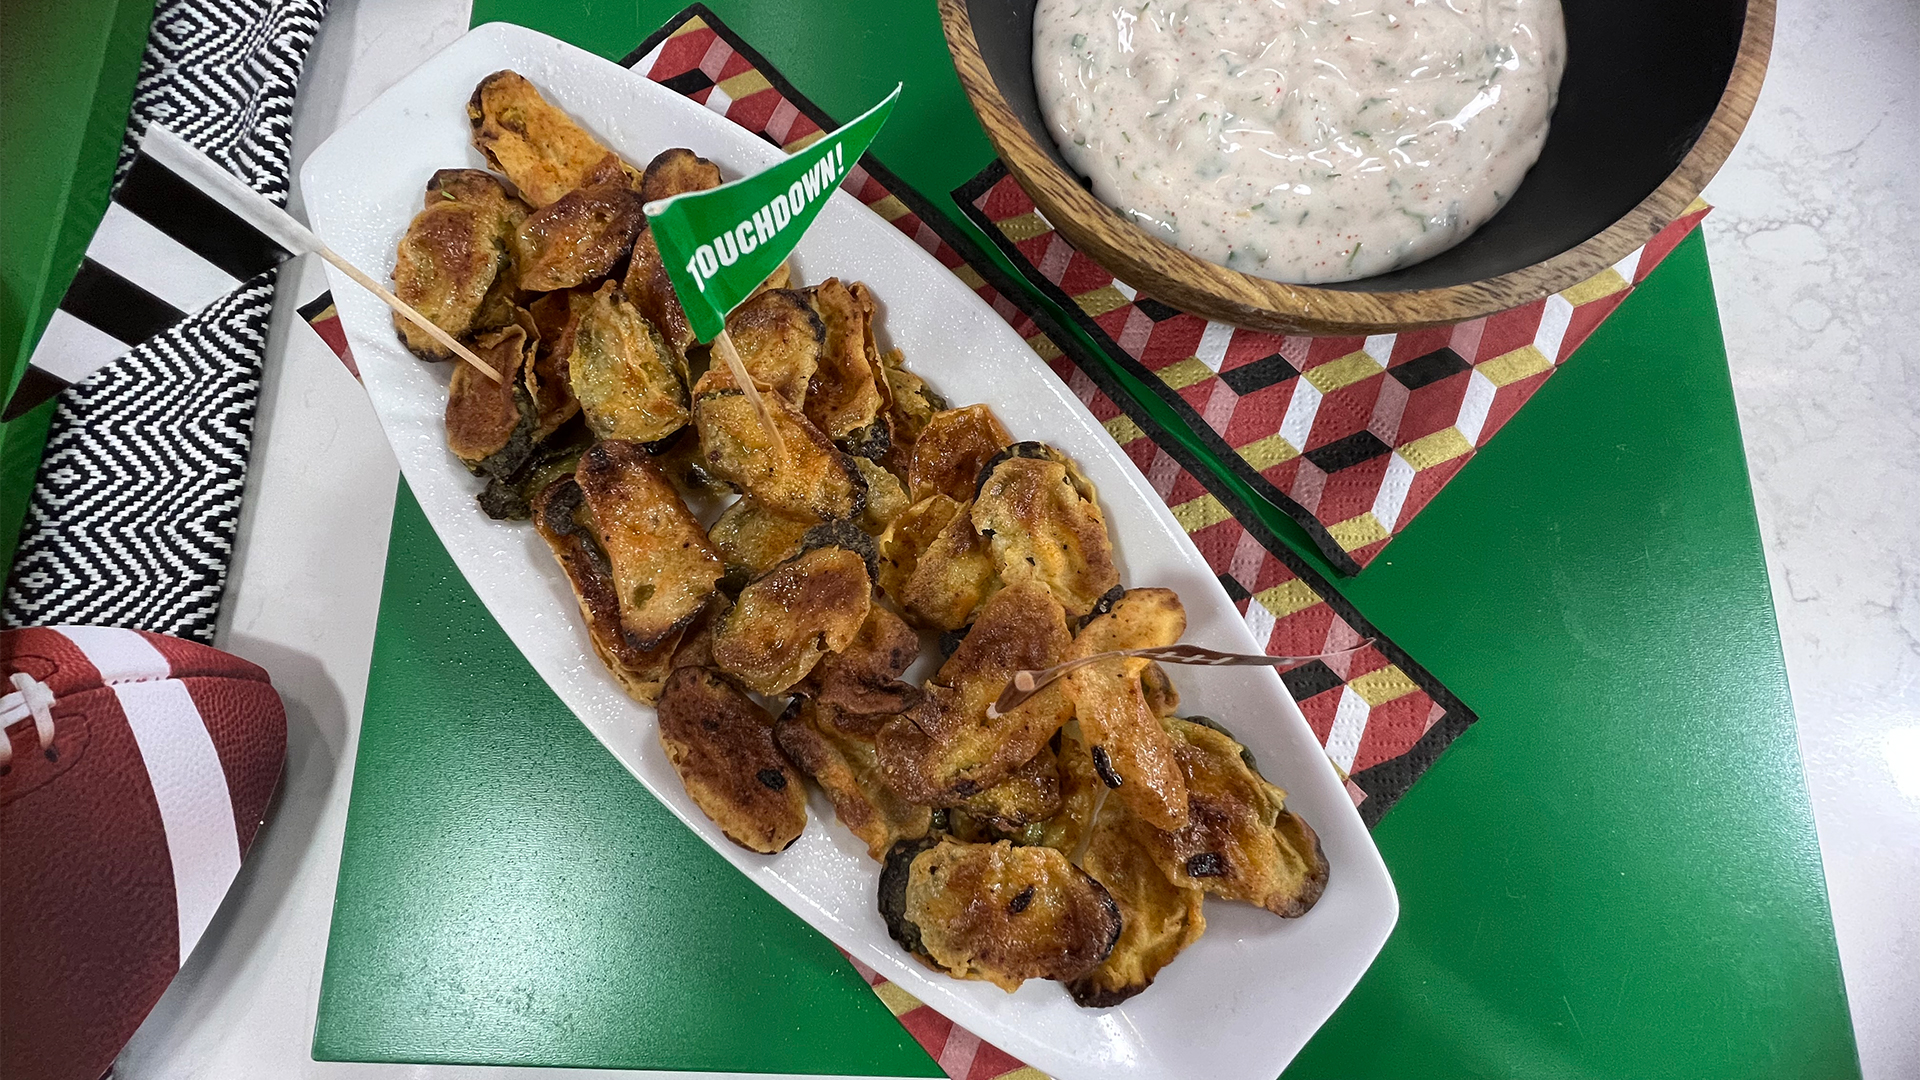 Air fryer pickle chips with ranch dip